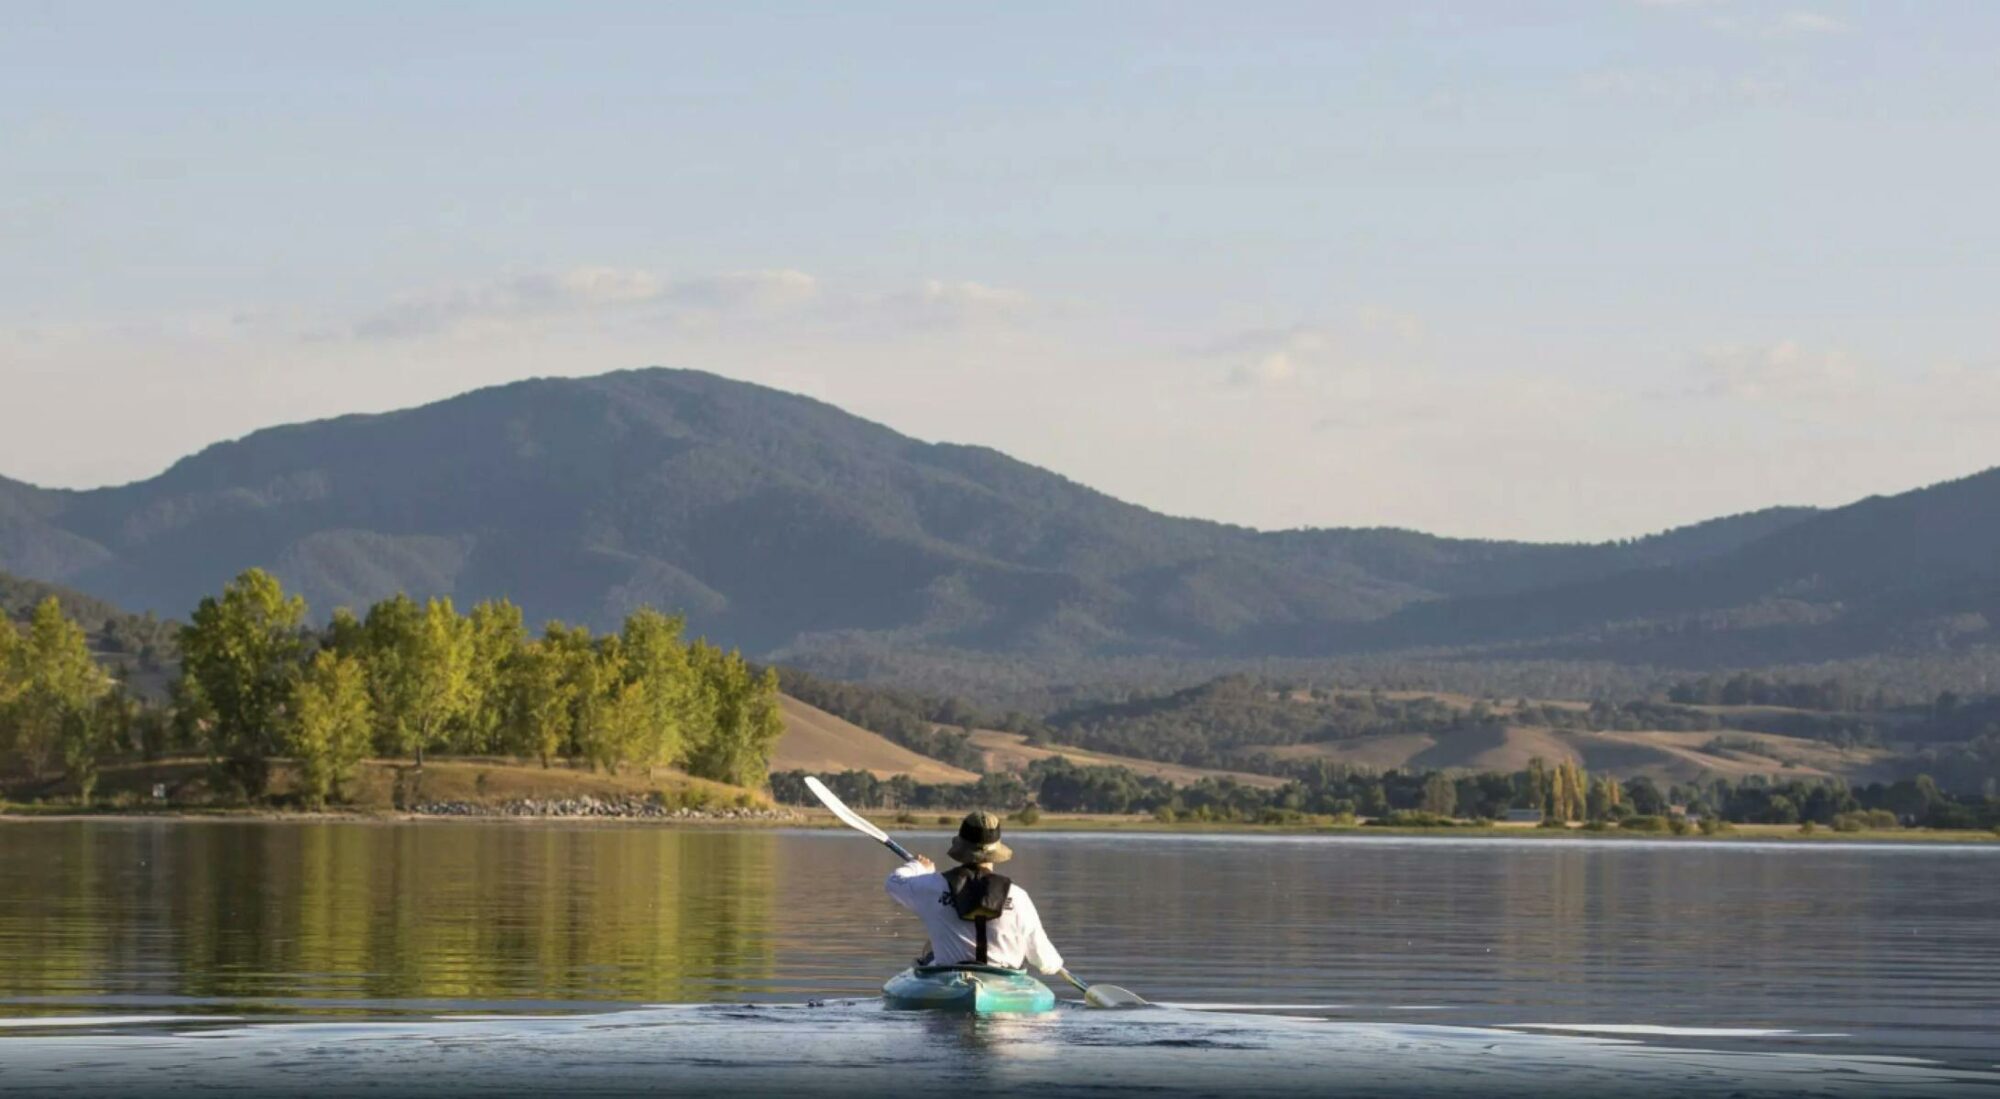 Kayaking the still waters of Khancoban Pondage in the soft light